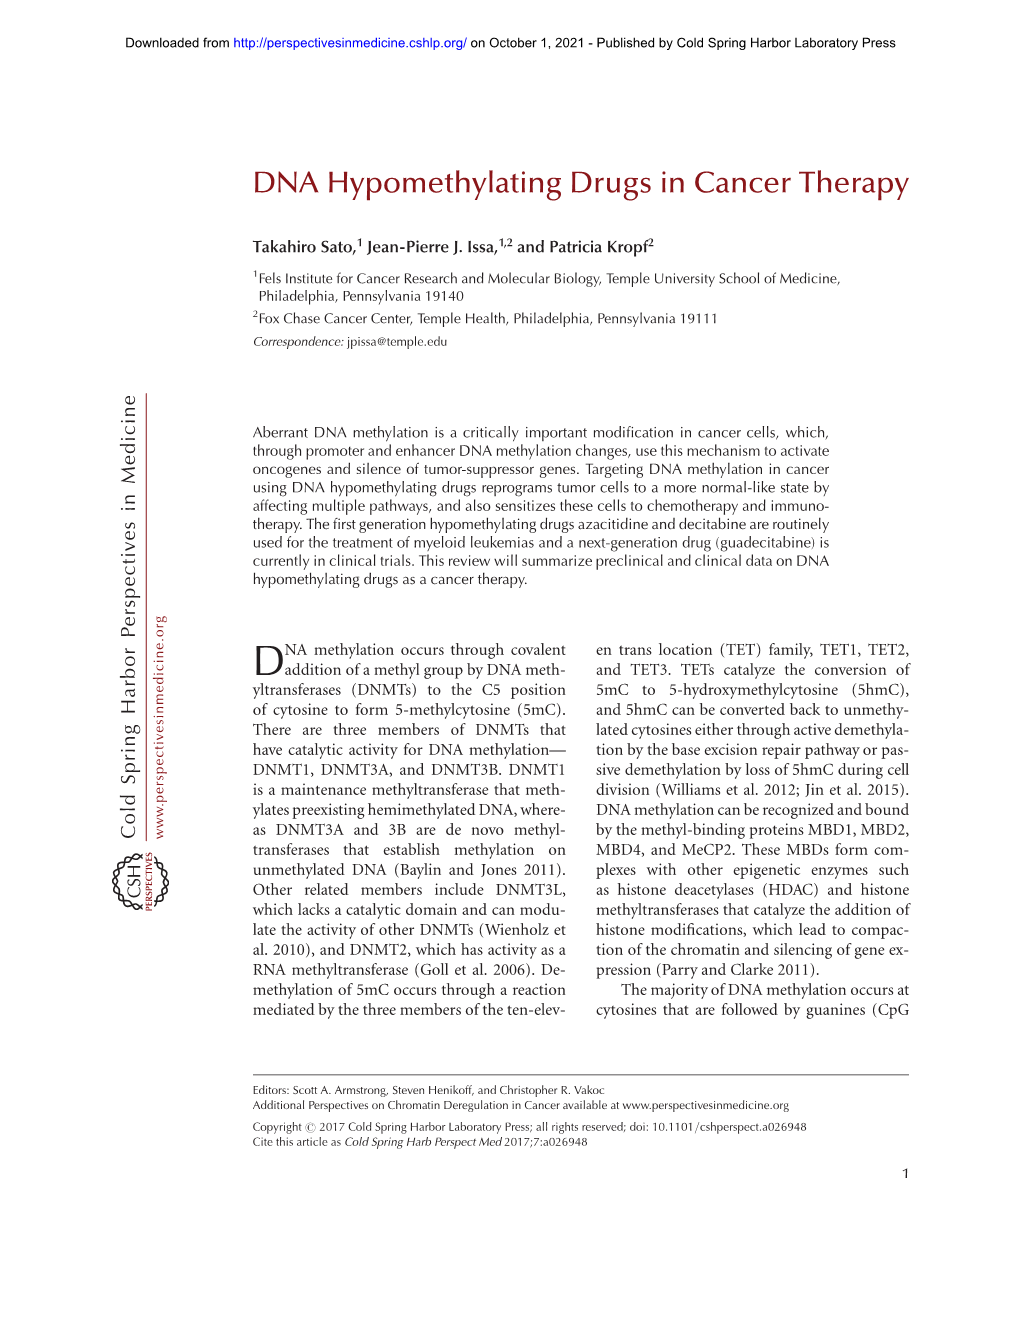 DNA Hypomethylating Drugs in Cancer Therapy